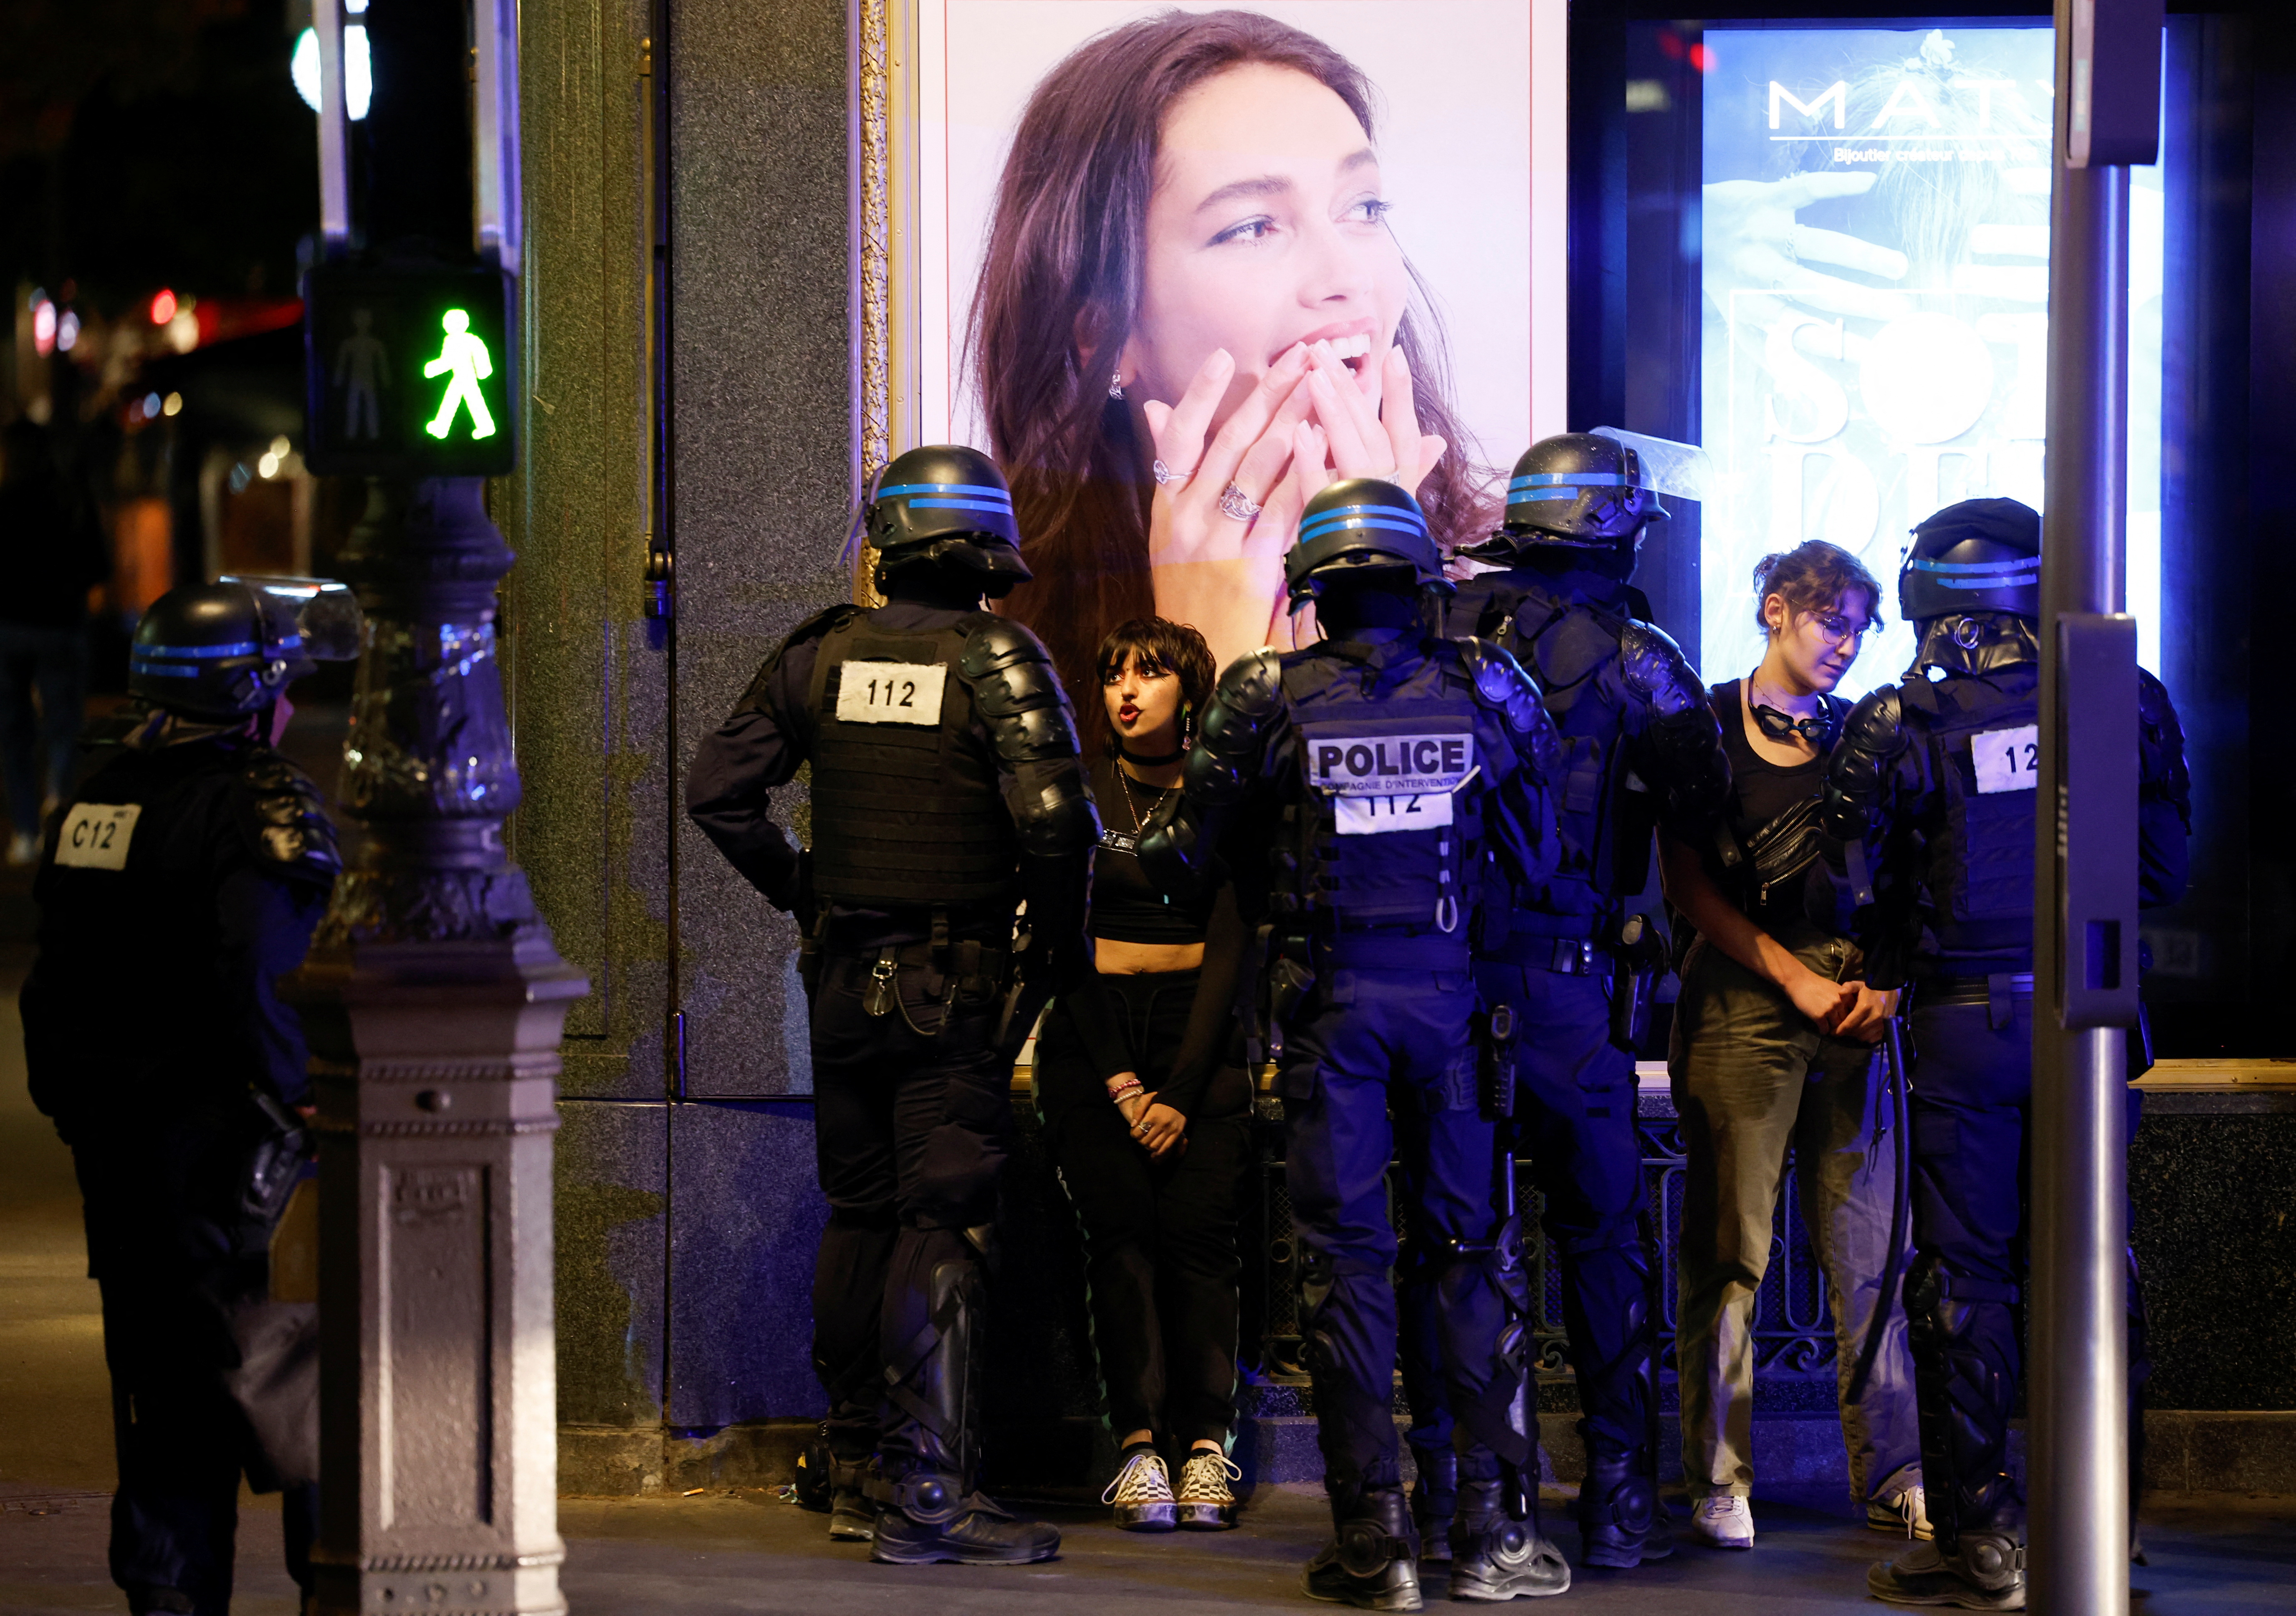 Fourth night of riots after teenager shot dead by police in Paris suburb